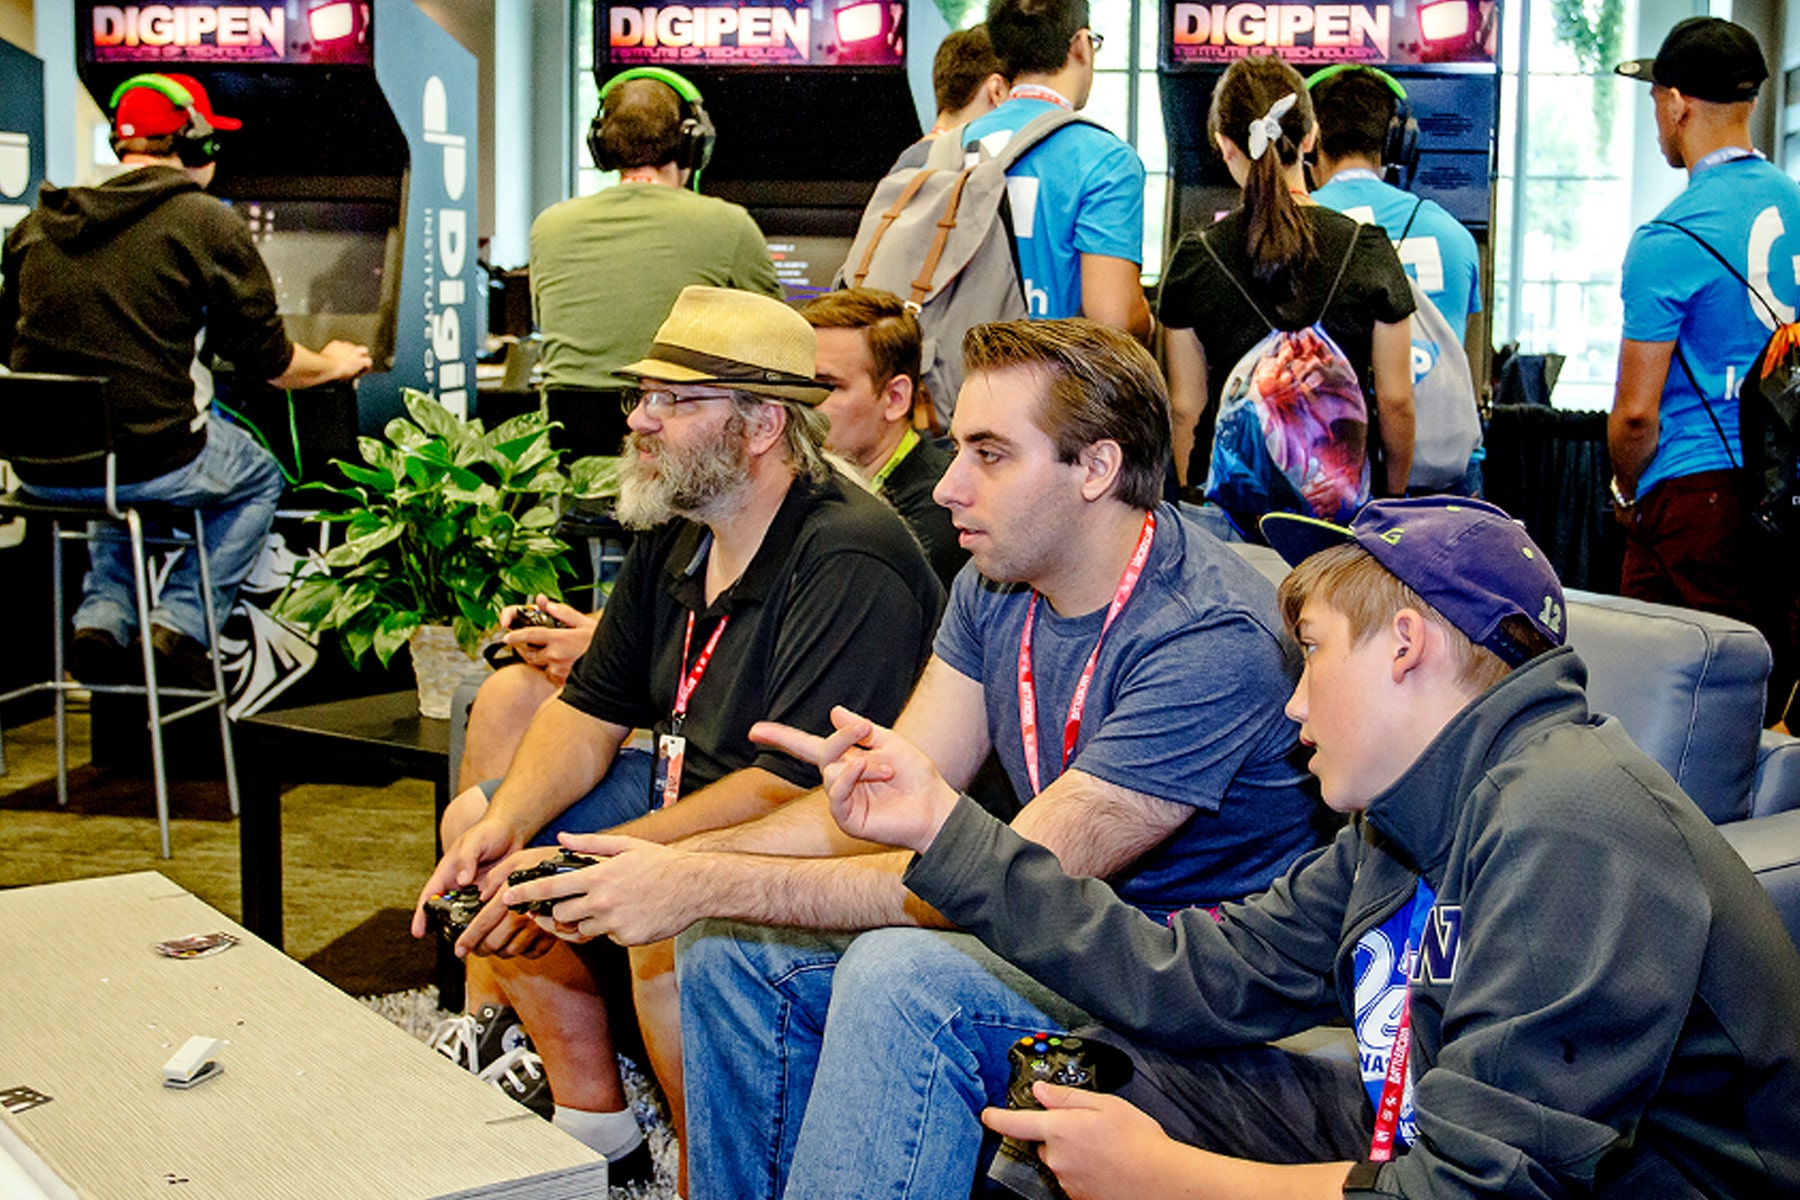 PAX attendees play games on a couch in the DigiPen arcade booth